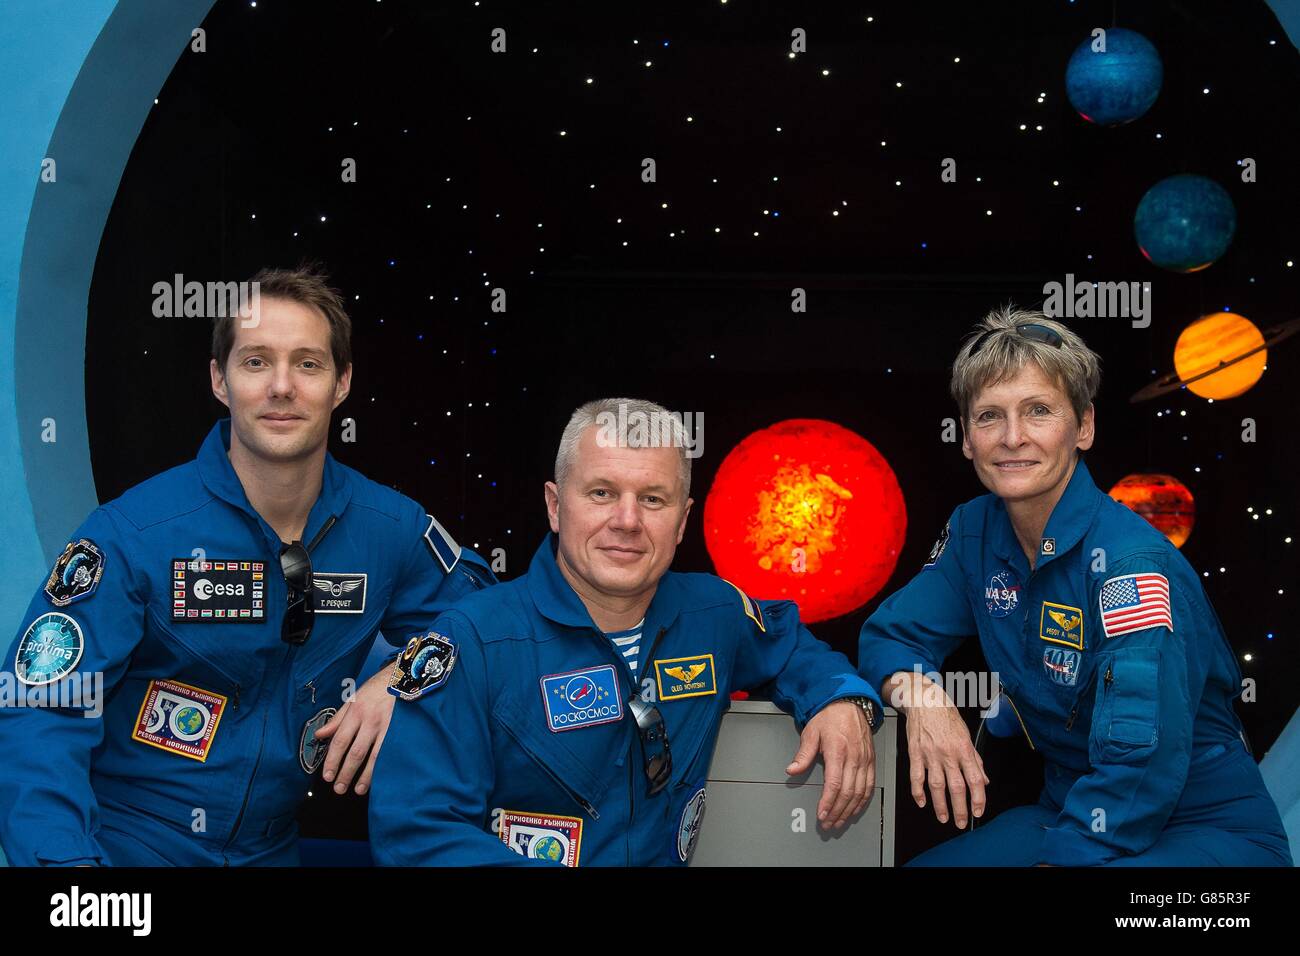 International Space Station crew Expedition 49 backup crew members pose in front of a mural of the planets during a tour of a museum June 26, 2016 in Baikonur, Kazakhstan. Members from L-R:   ESA astronaut Thomas Pesquet, Russian cosmonaut Oleg Novitskiy and American astronaut Peggy Whitson. Stock Photo